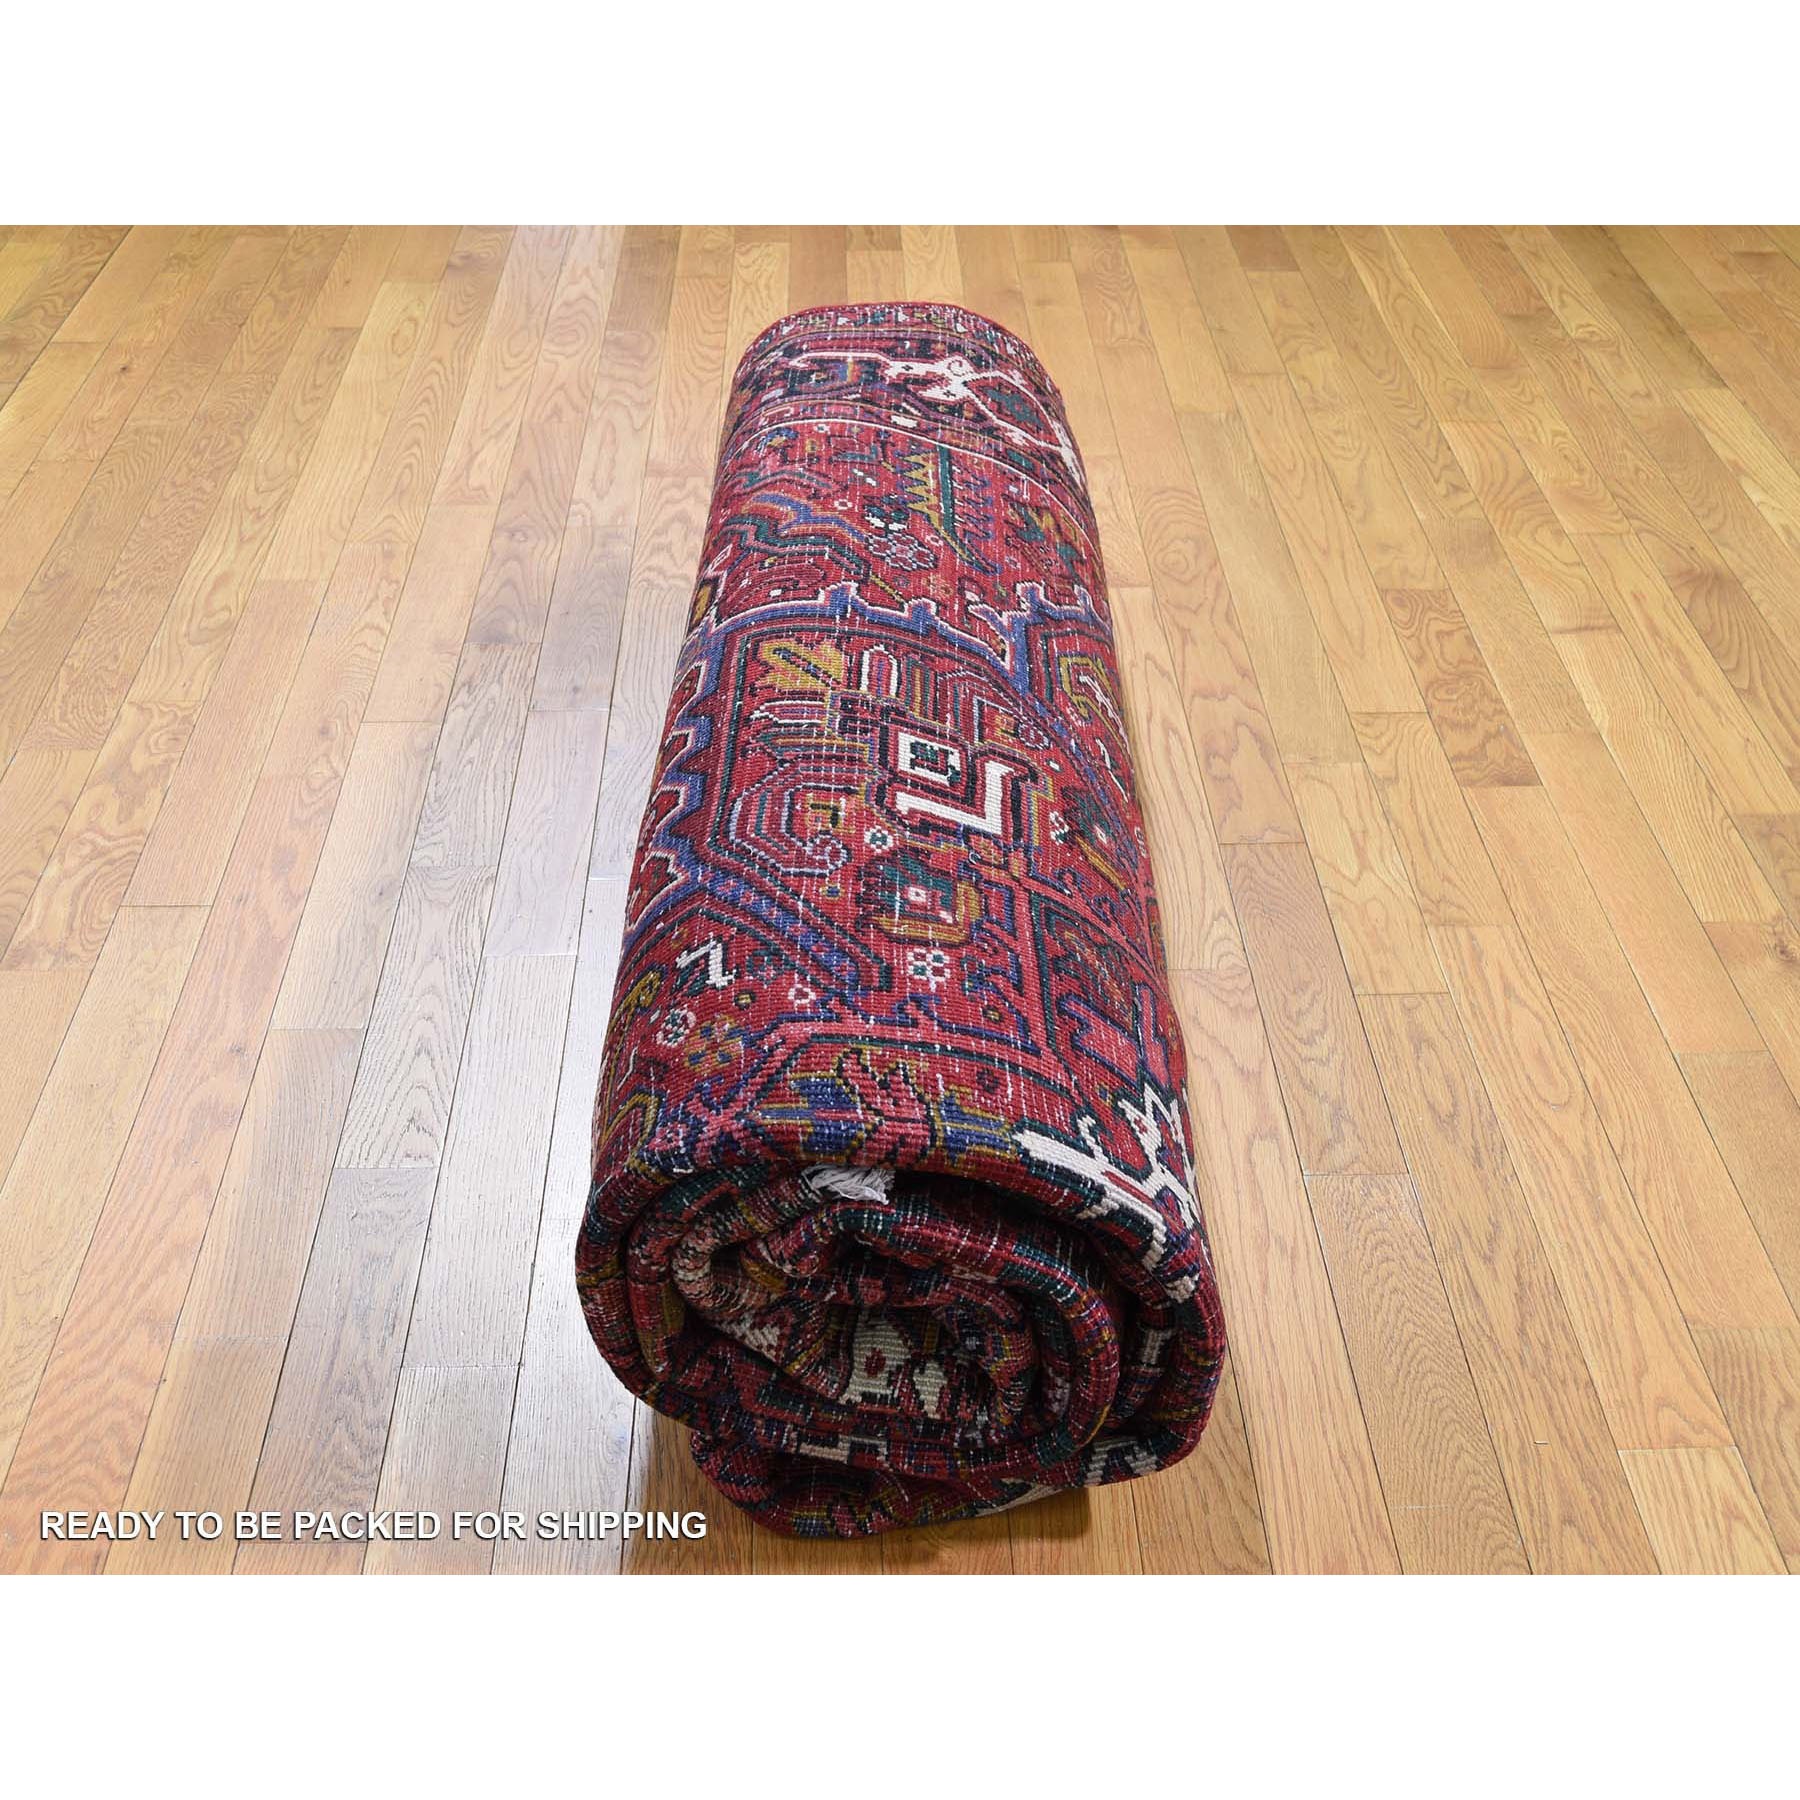 9-3 x12-4  Red Semi Antique Heriz Good Condition Pure Wool Hand-Knotted Oriental Rug 